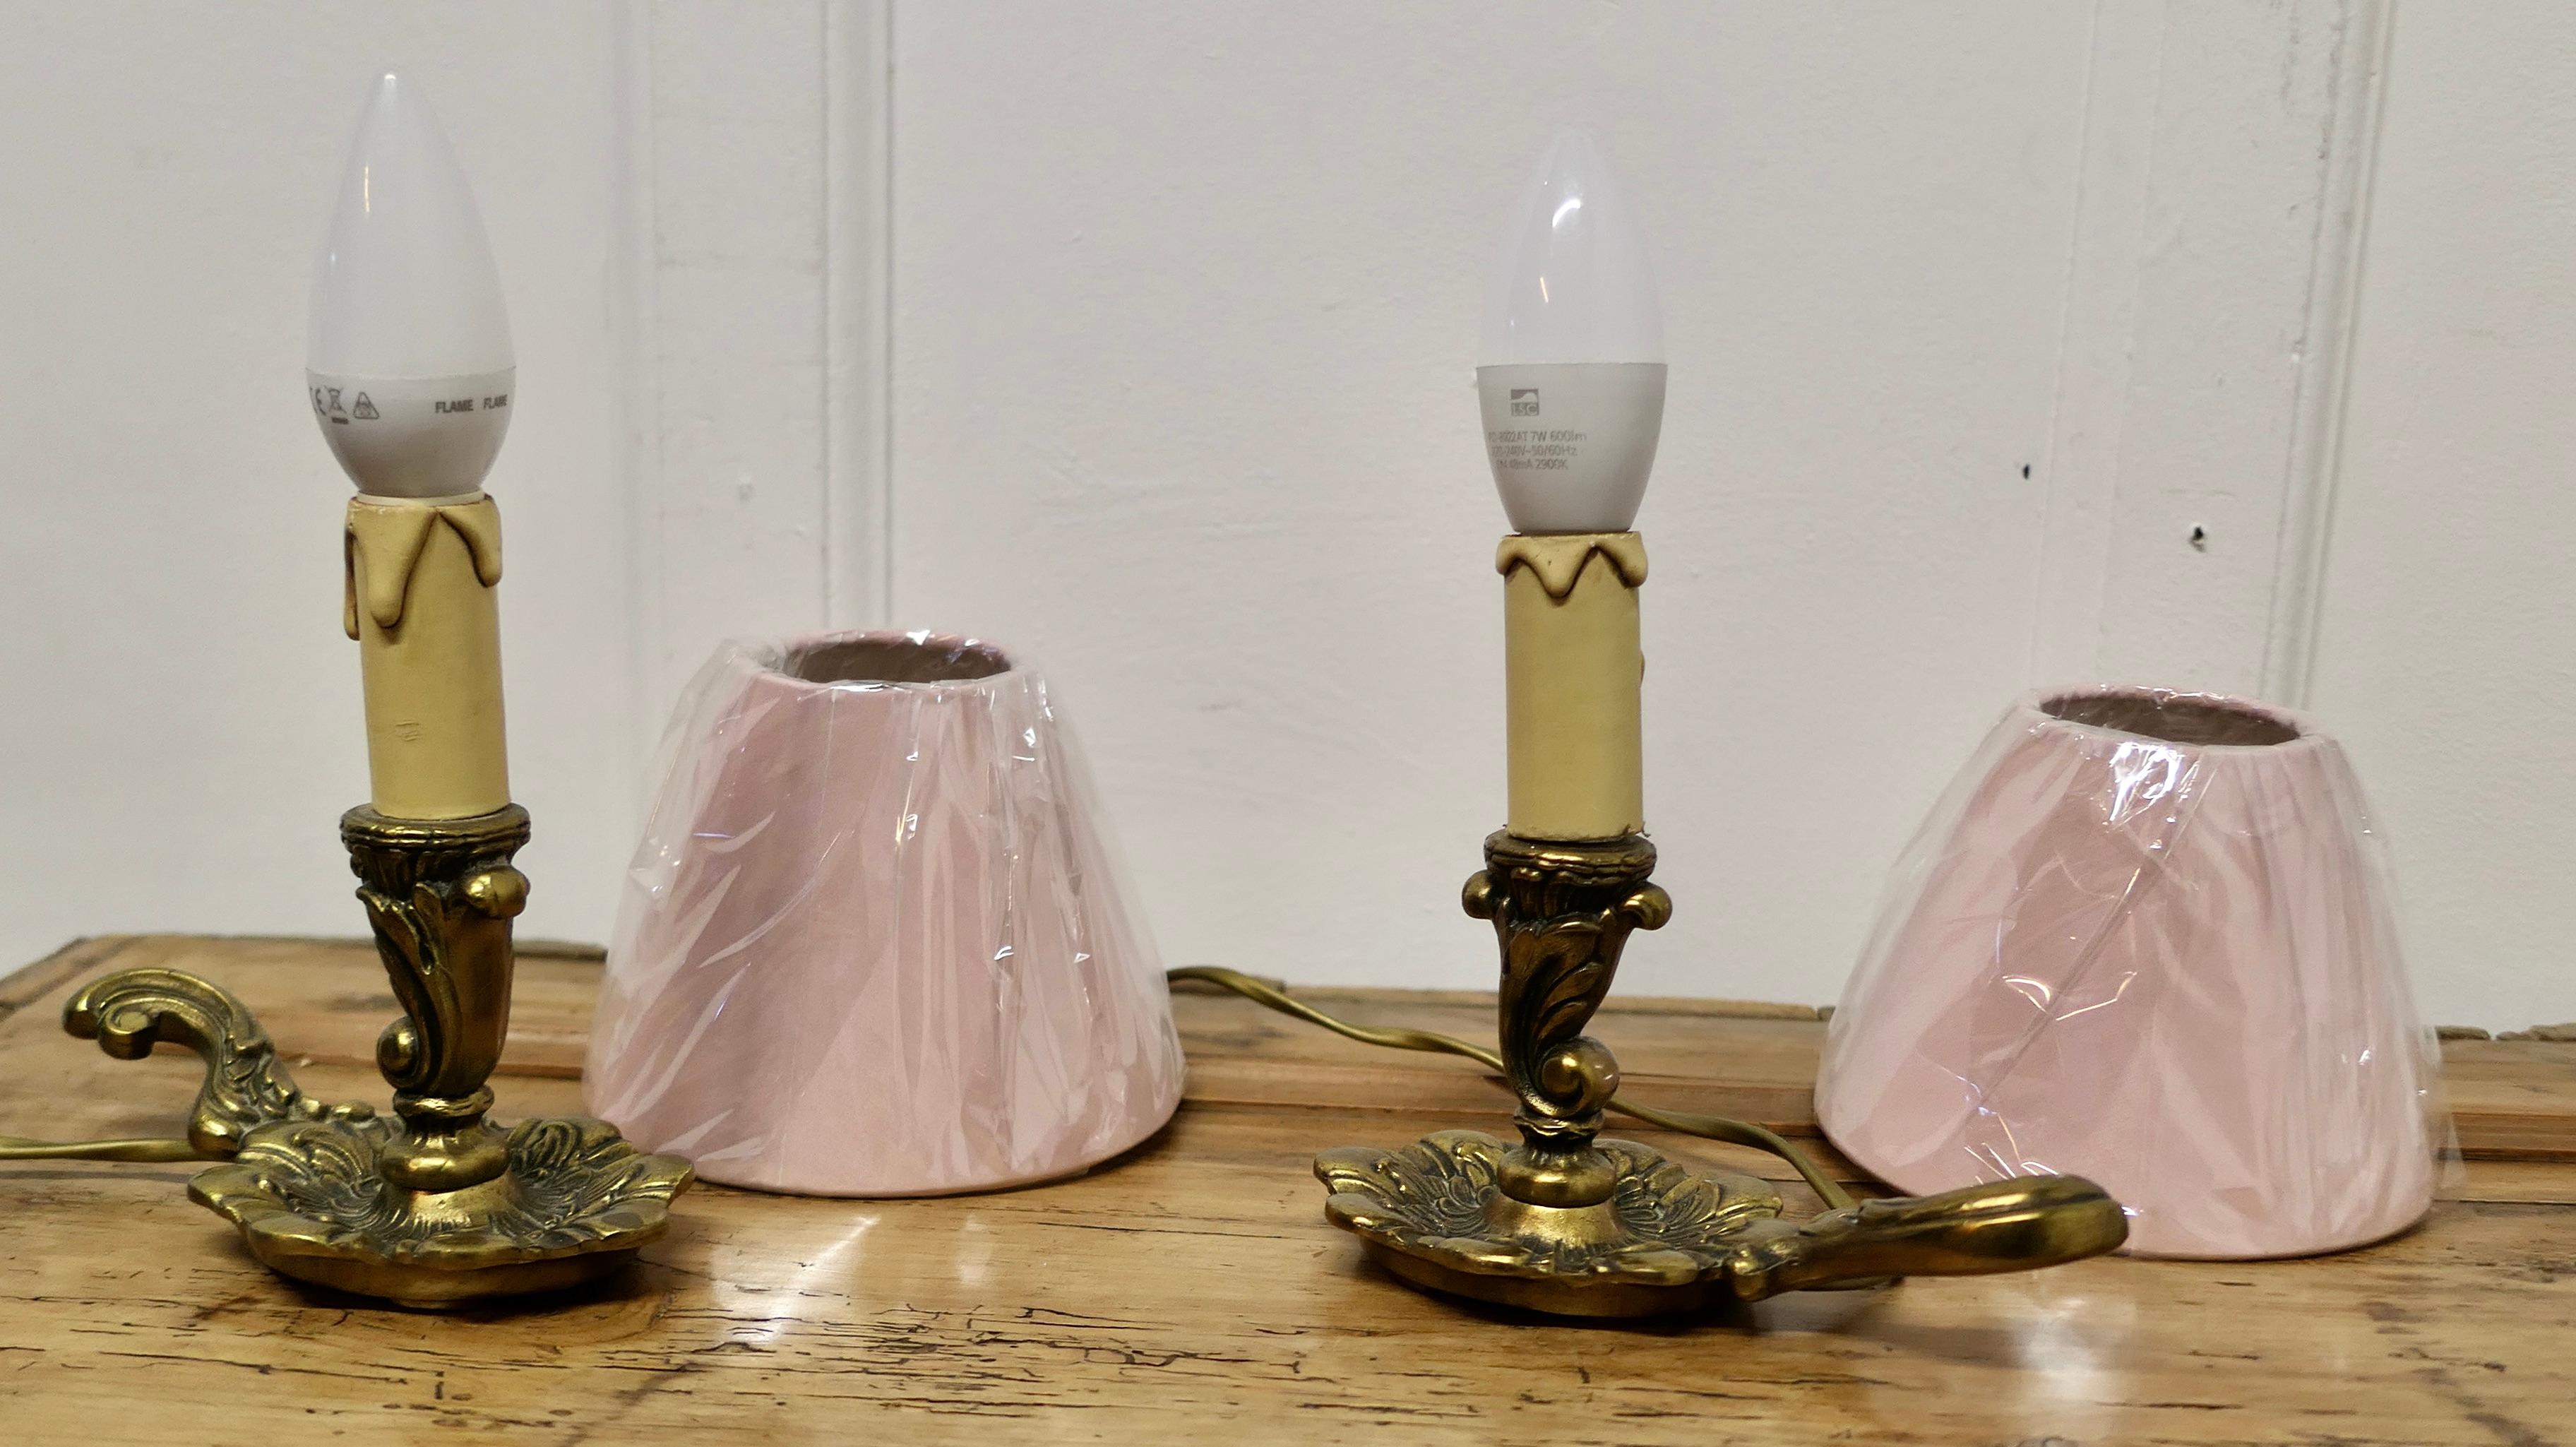 Pair of French Brass Bedside Lamps   

These are a good quality pair of small decorative bedside lamps, the bases are made in solid brass in the shape of a candlestick with a handle to one side
They have pretty new shades in pink
The lamps are good